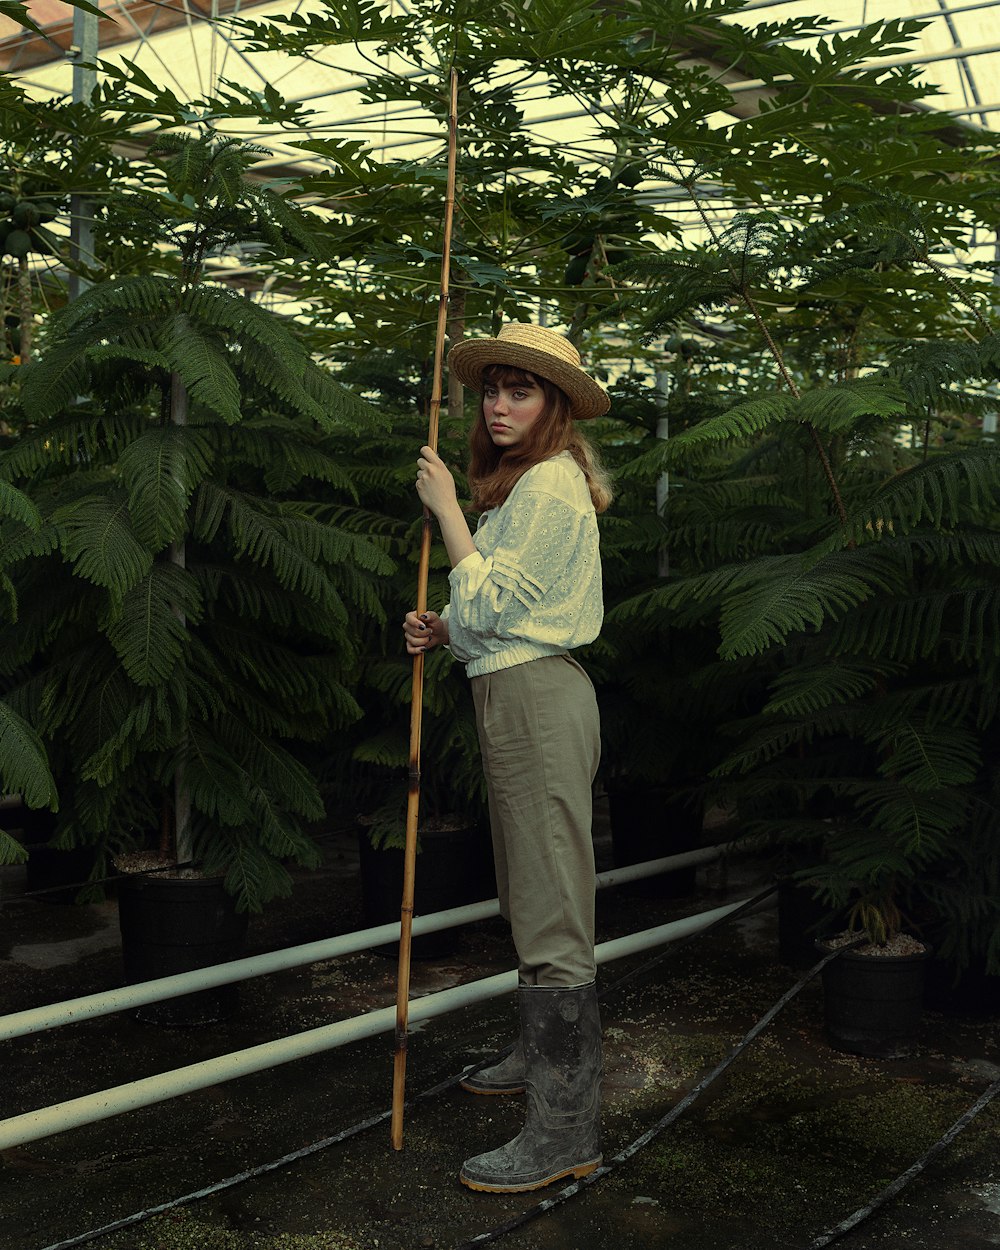 a woman standing in a greenhouse holding a stick